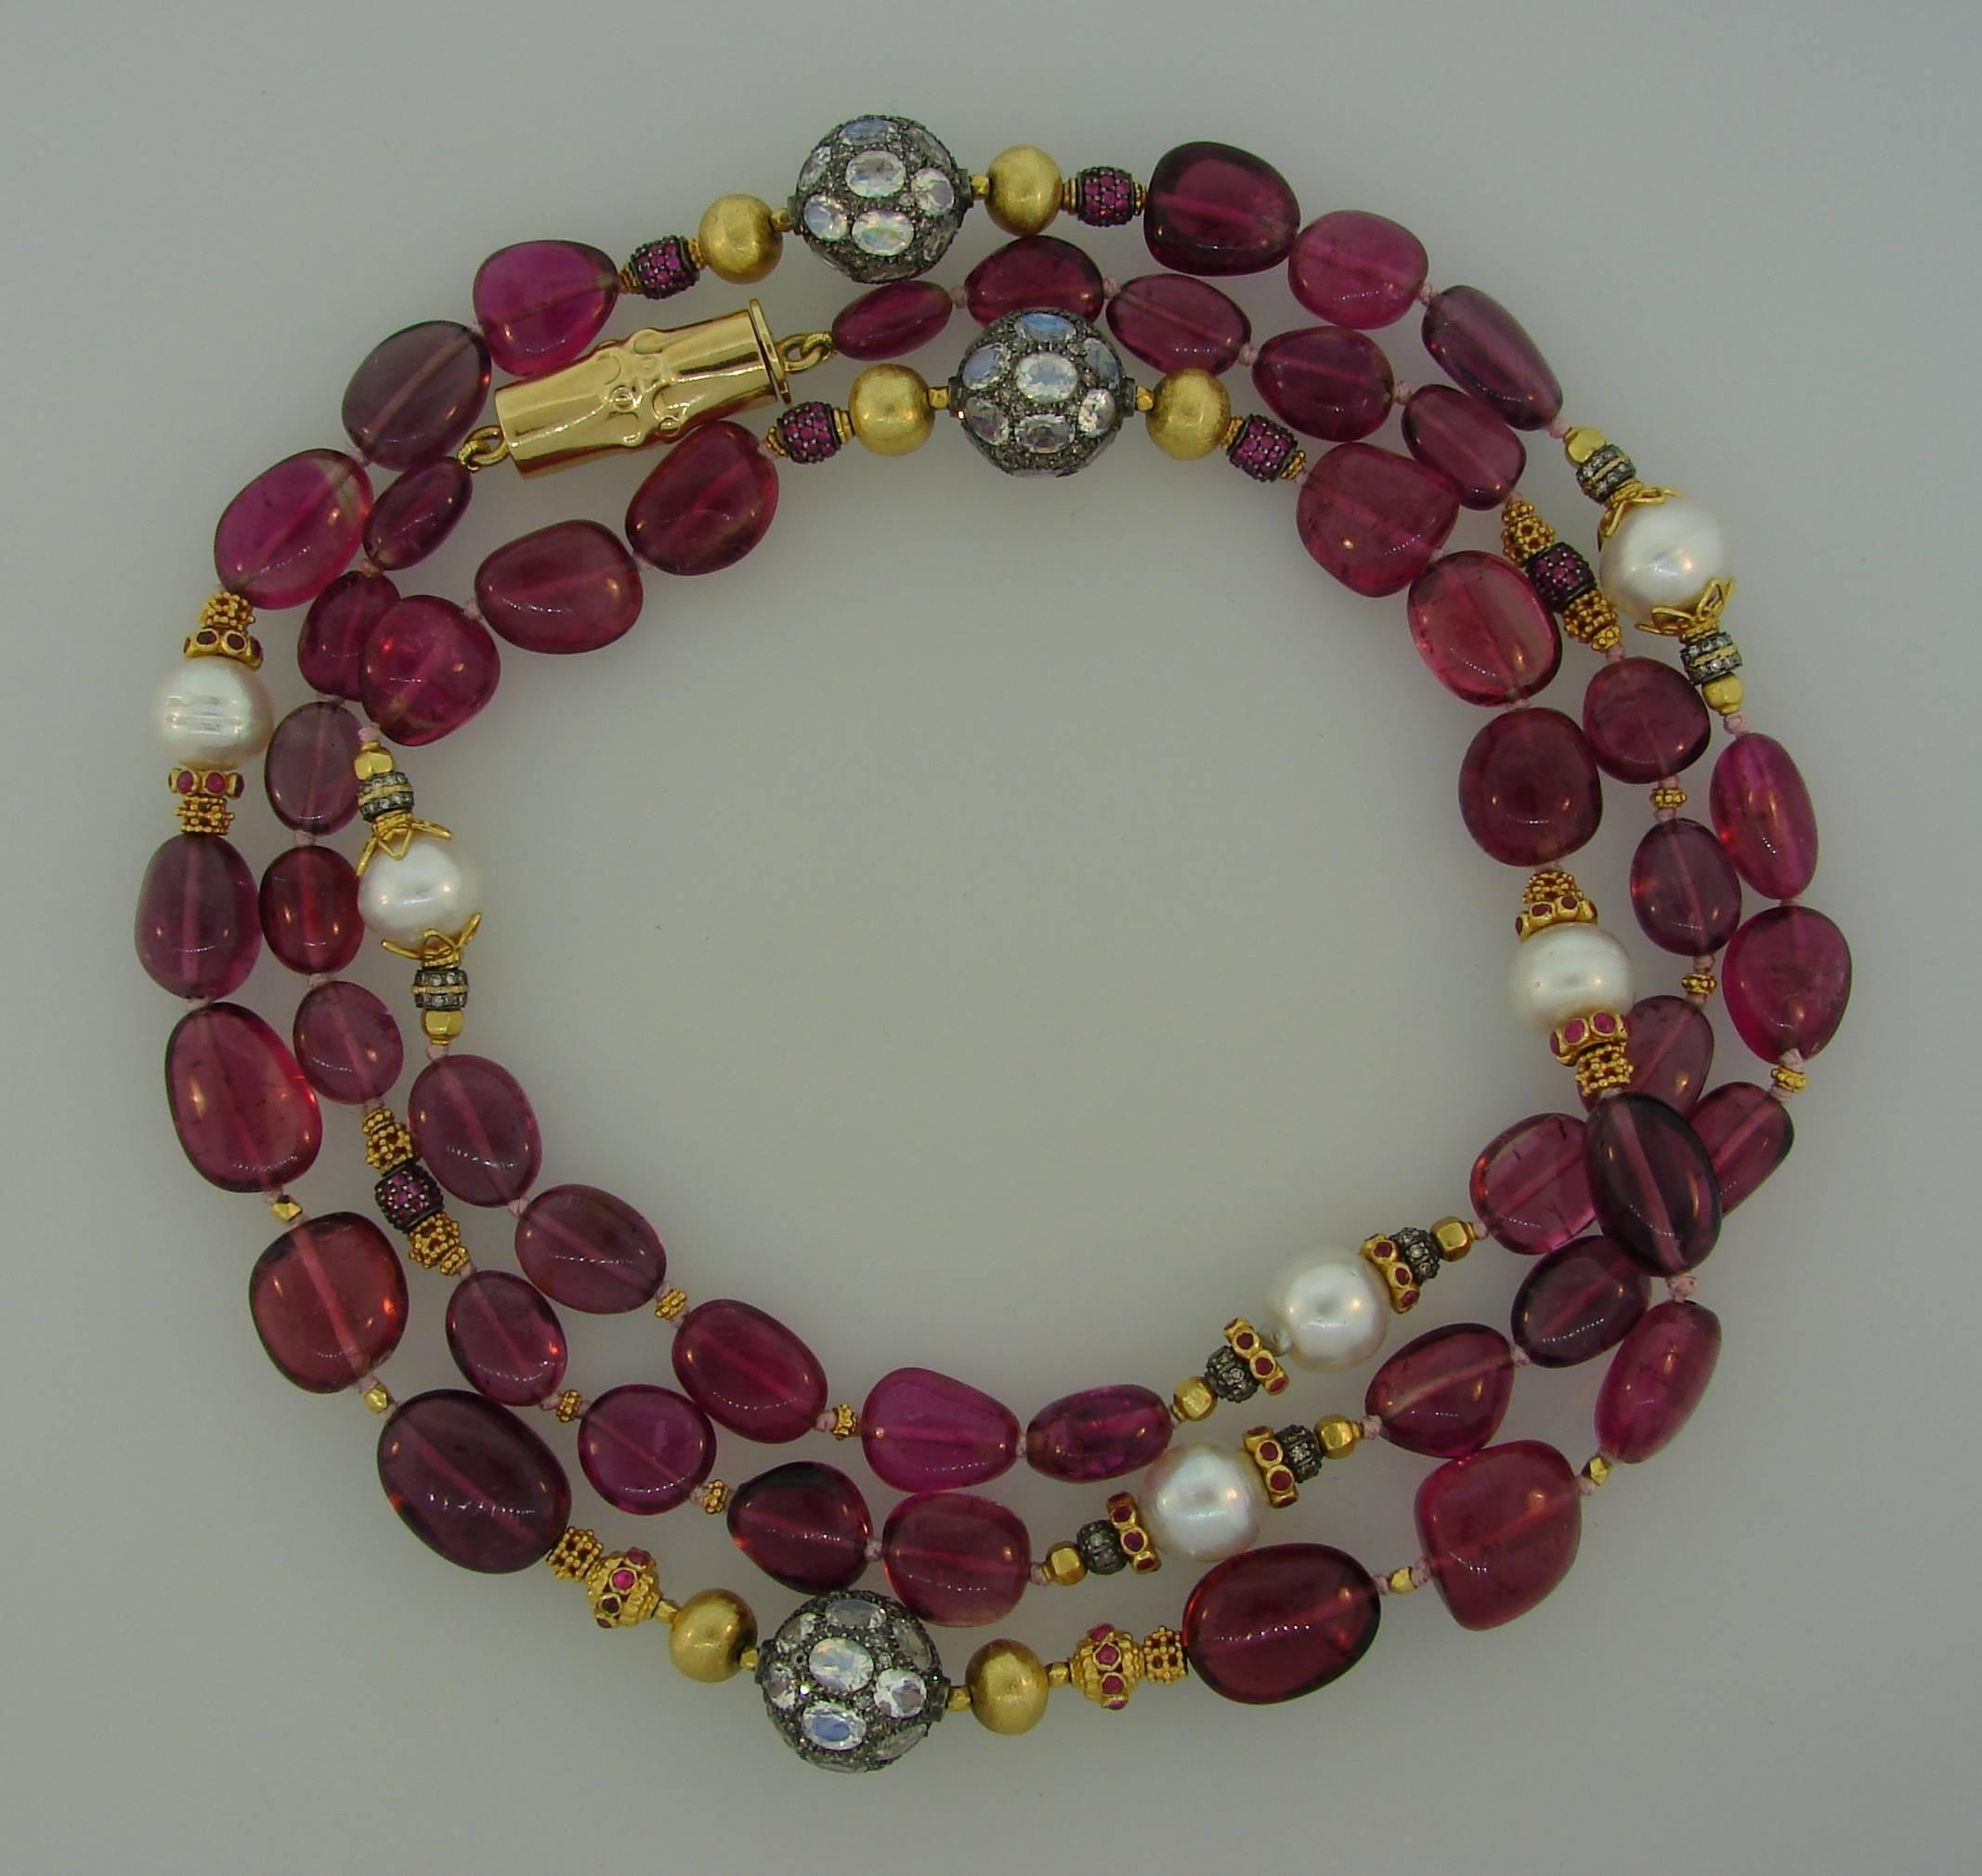 Lovely necklace created by Verdura in the 2000s. It is made of pink tourmaline beads, rubies, moonstone,  single cut diamonds, South Sea pearls, yellow gold beads, and silver. The Bamboo clasp is made of 18k yellow gold. Colorful, versatile and